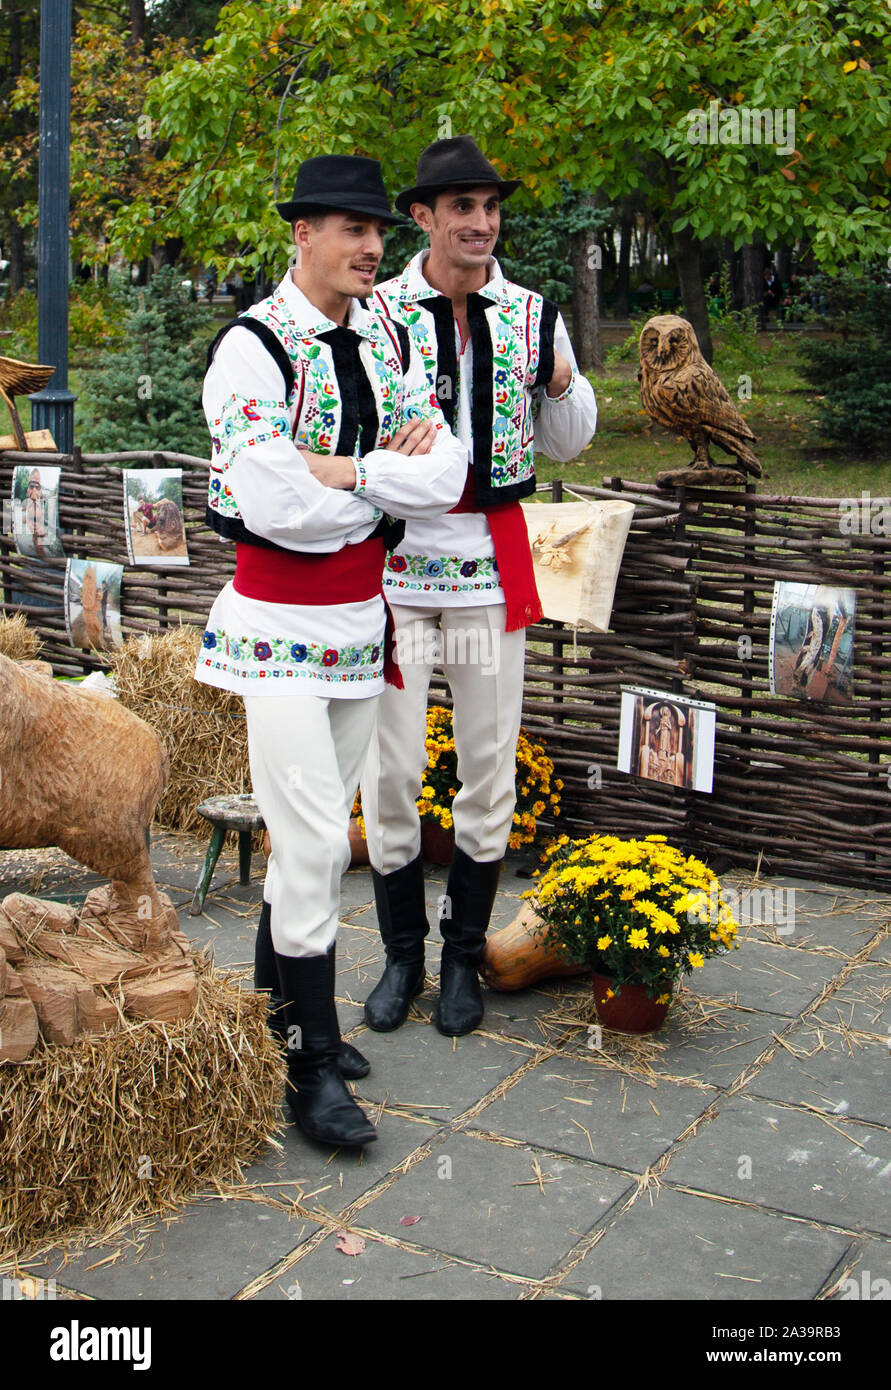 Chisinau, Moldova - October 5, 2019: Two young men in a traditional Balkan costume at a festival in Chisinau, the capital of Moldova. Rest in the park Stock Photo